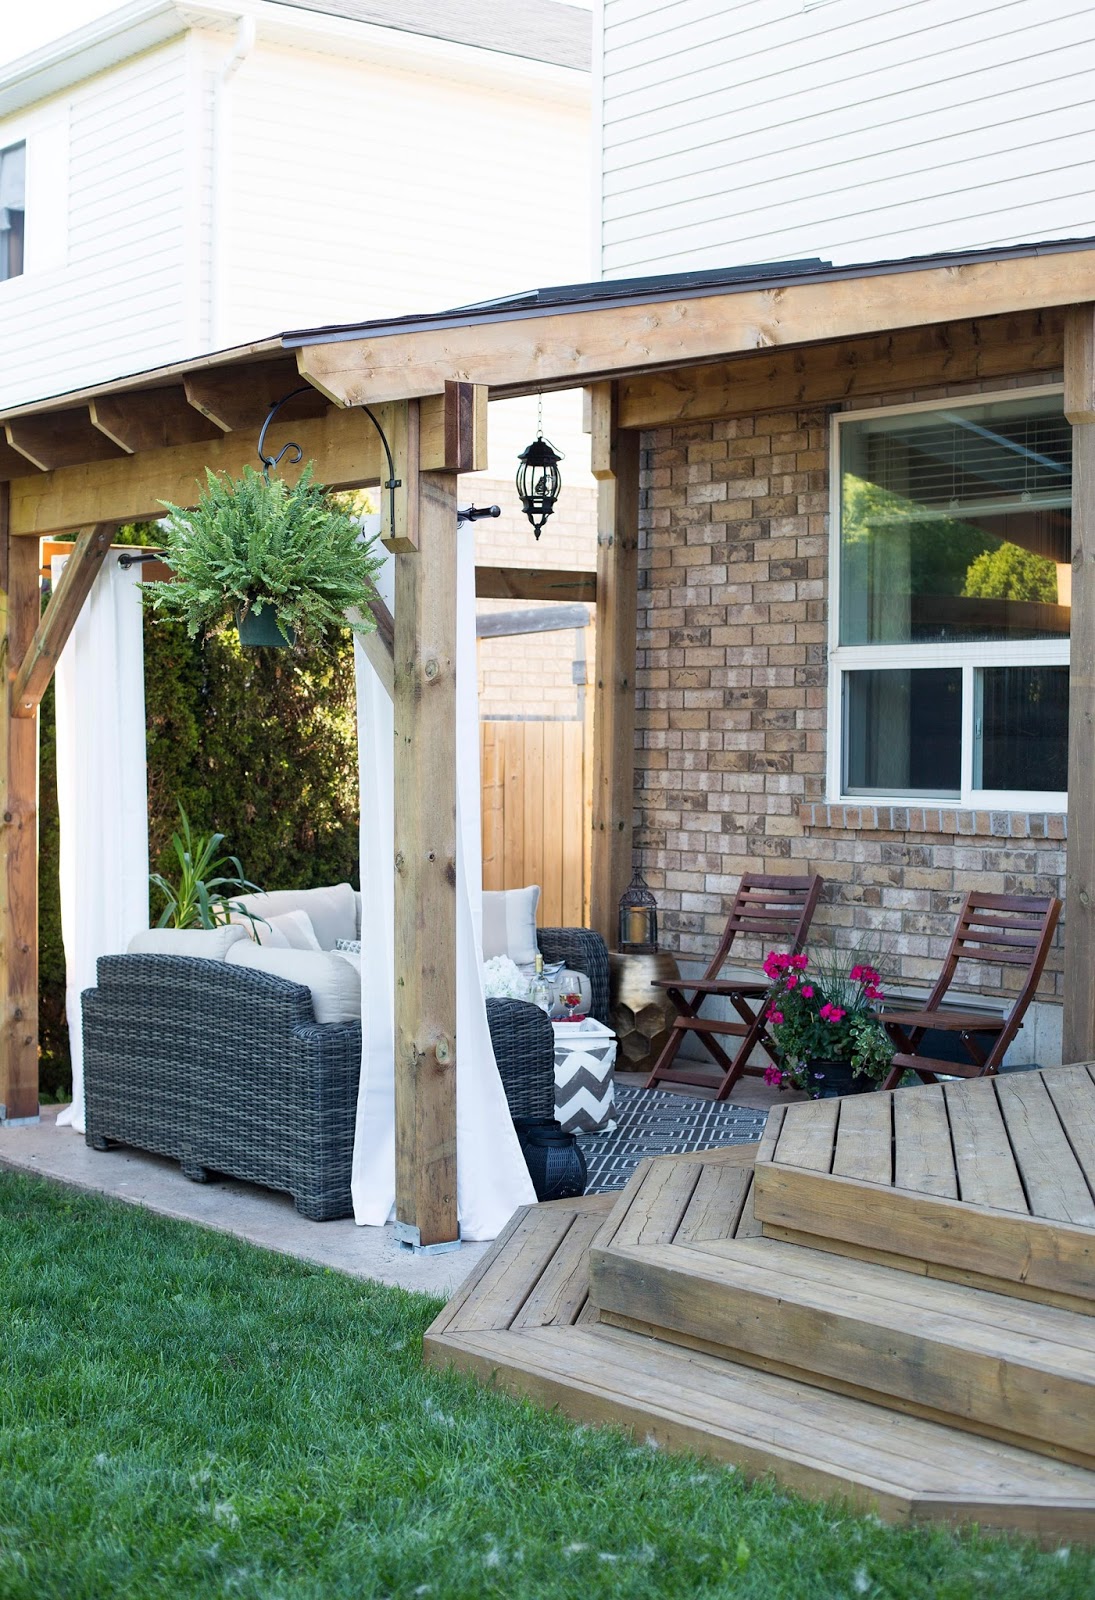 Hdblogsquad How To Build A Covered Patio Brittany Stager - How To Build An Attached Covered Patio